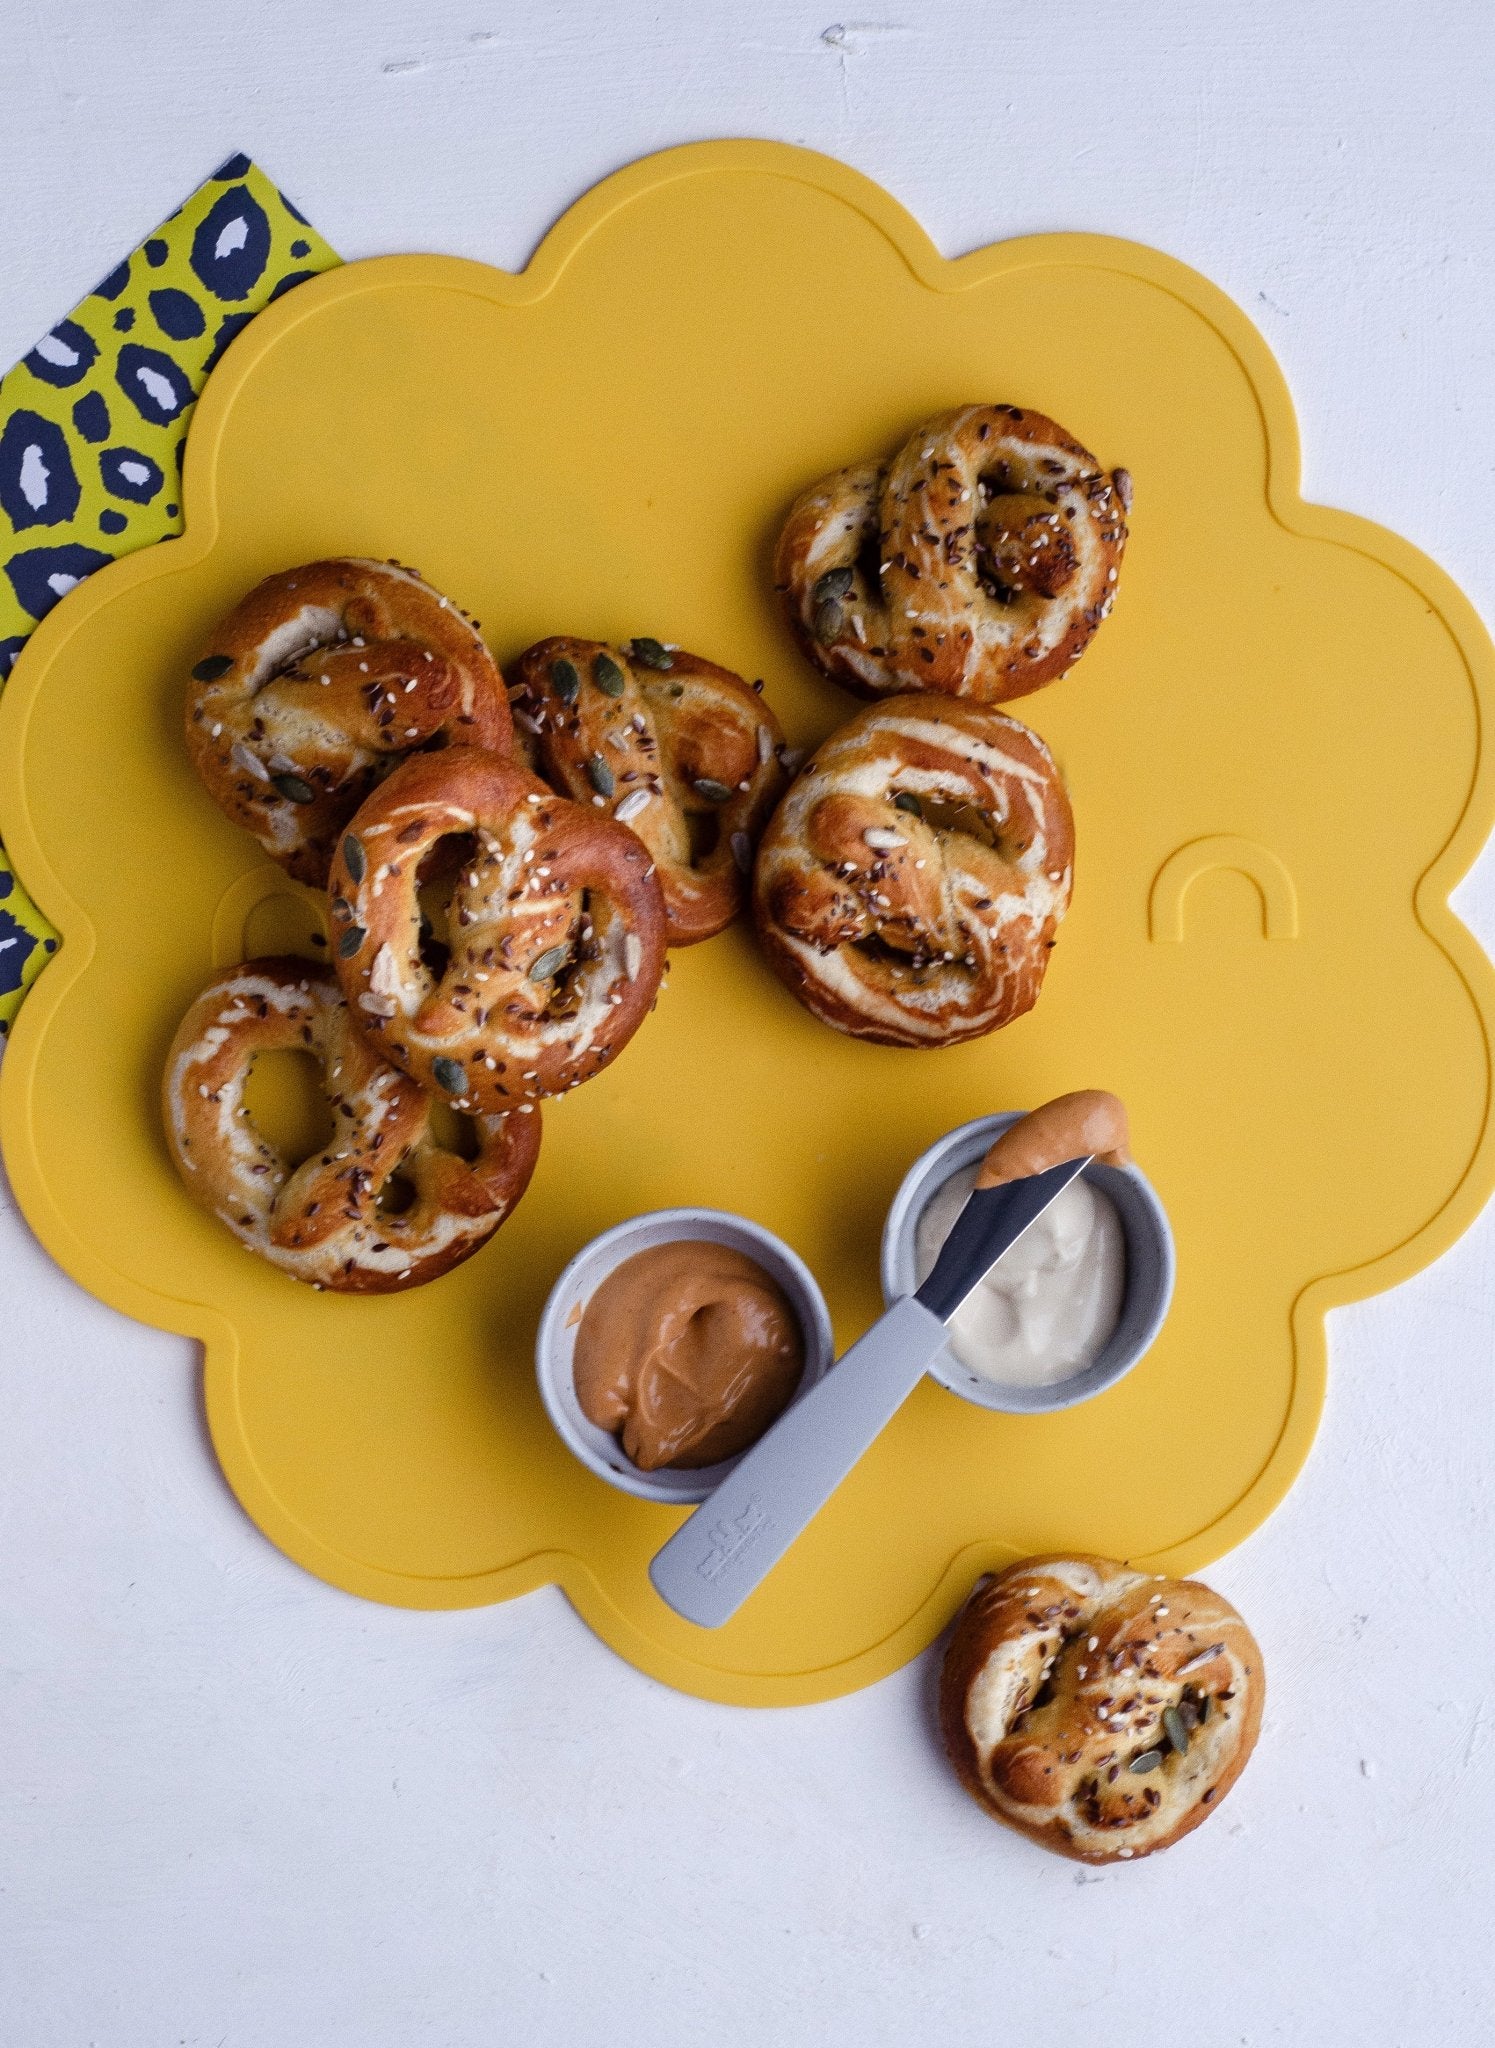 Savoury Seeded Pretzels and Dipping Sauce